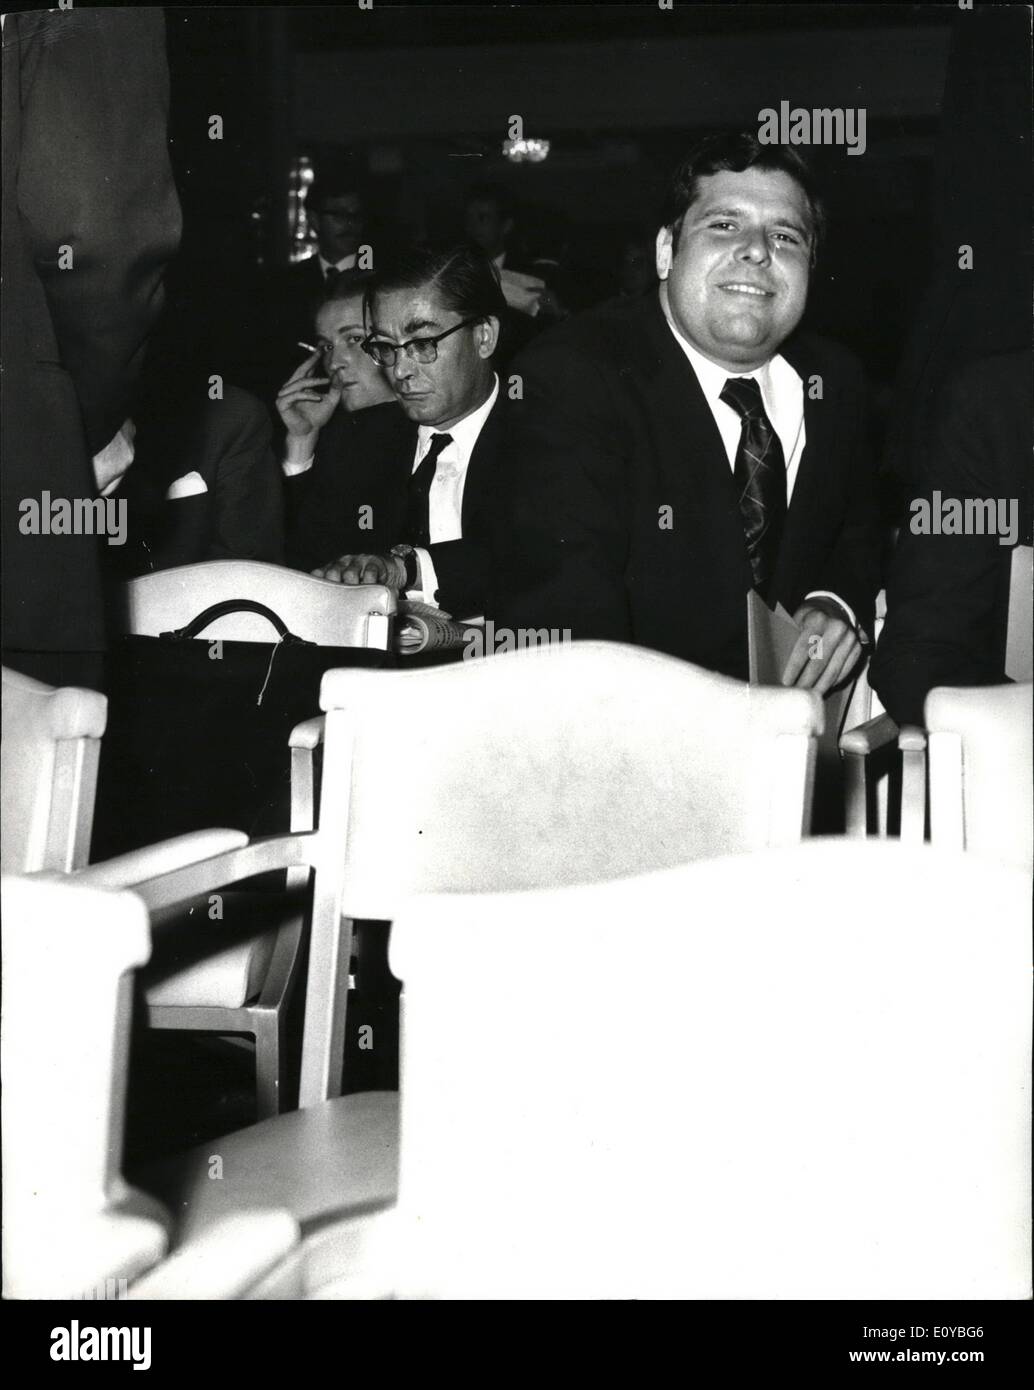 Oct. 10, 1969 - Uproar At Meeting Of Pergmon Press Shareholders At The Connaught Rooms: As Mr. Robert Maxwell, Labour MP and Chairman of Porgam,en Press was about open the meeeting of shareholders who were their to decide whether Mr. Saul Steineberg's Lease team should take over management central of Proamen from Mr. Maxwell, four men jump onto the Platform and one of them a solietoer,. tried to speak the meeting. After a few minutes he left the platform as the microphones went dead and the shareholders were chanting and hand-clappio with his three Colleagues. Photo Shows Mr Stock Photo